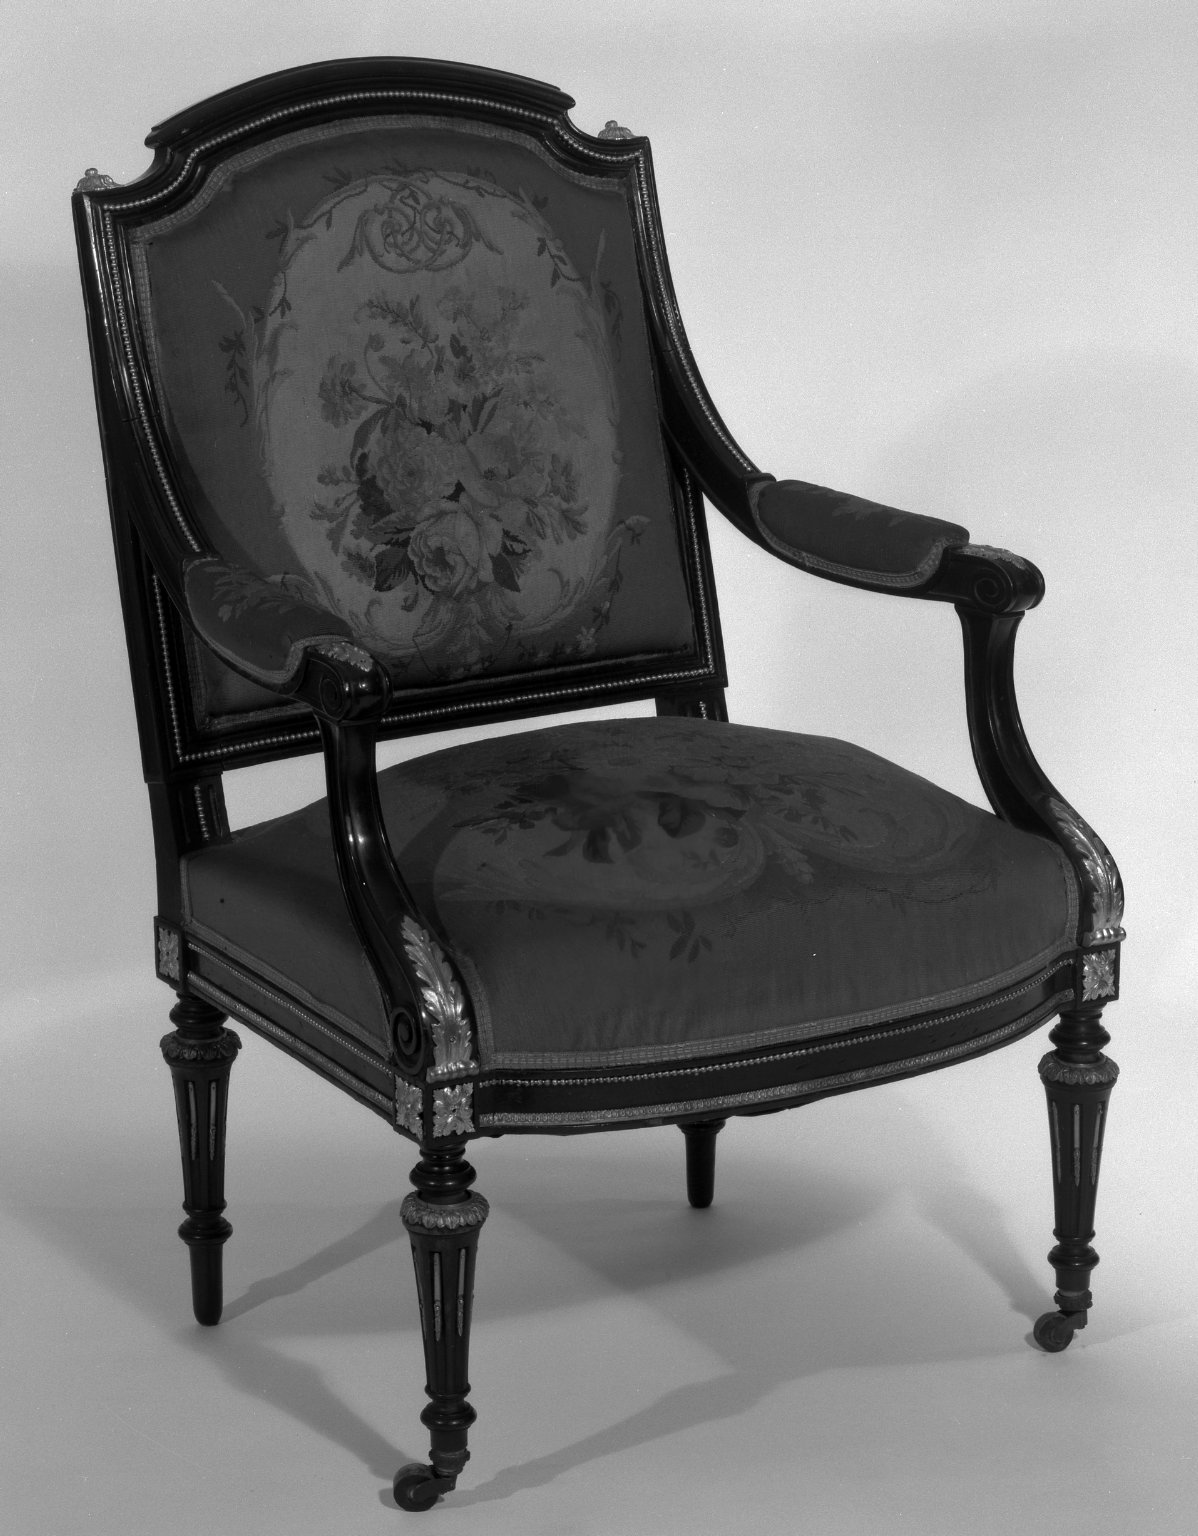 Black King Louis XVI Dining Chair with Solid Back Cushion - Royal